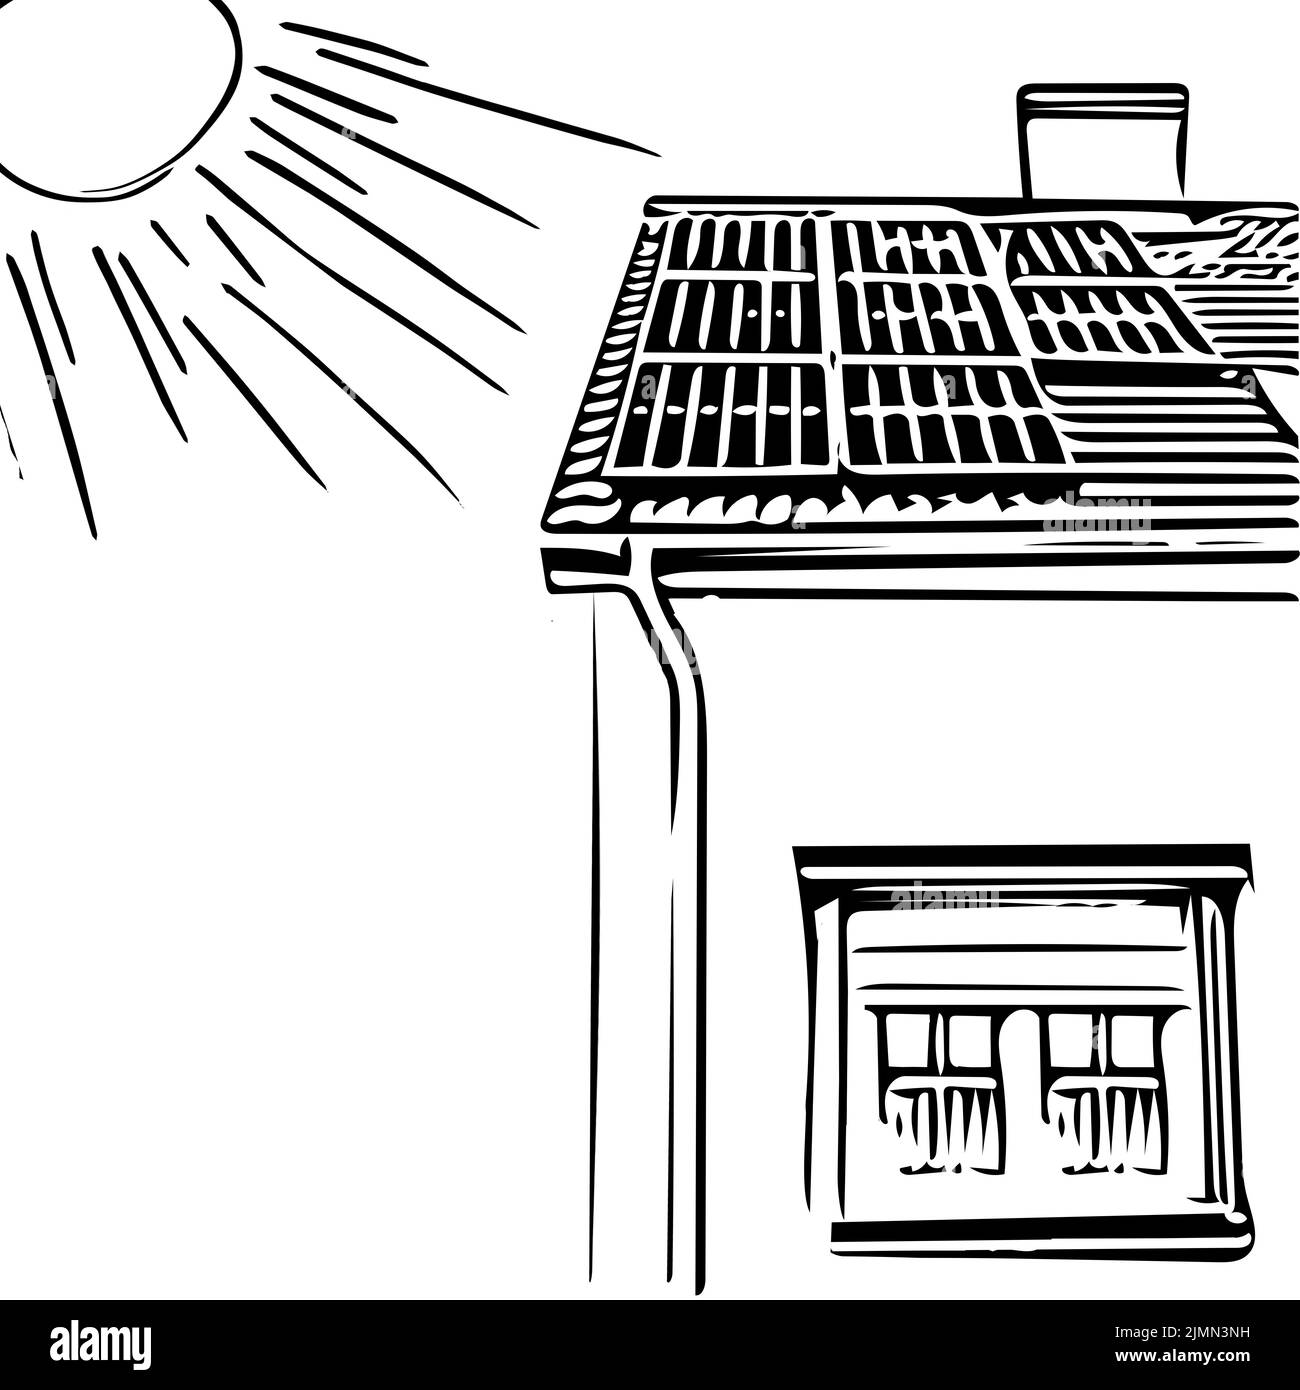 Solar panels on the roof of the house, solar. Simple drawing. Minimalist drawing of a house with solar panels. Stock Photo